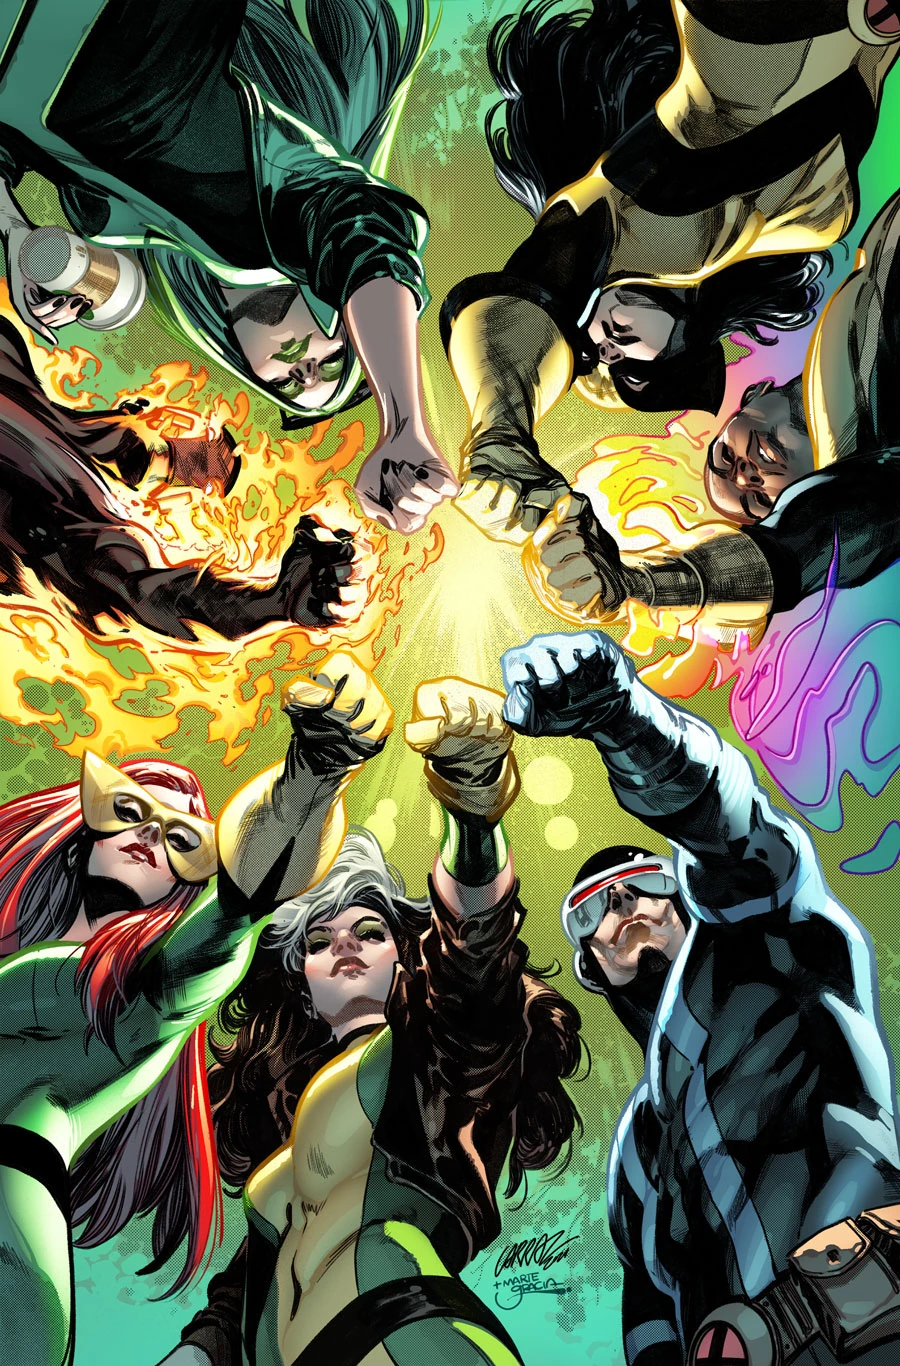 The X-Men assemble on Pepe Larraz and Marte Gracia's cover to X-men Vol. 6 #2 "Fearless, Chapter Two: Catching the Wave" (2021), Marvel Comics